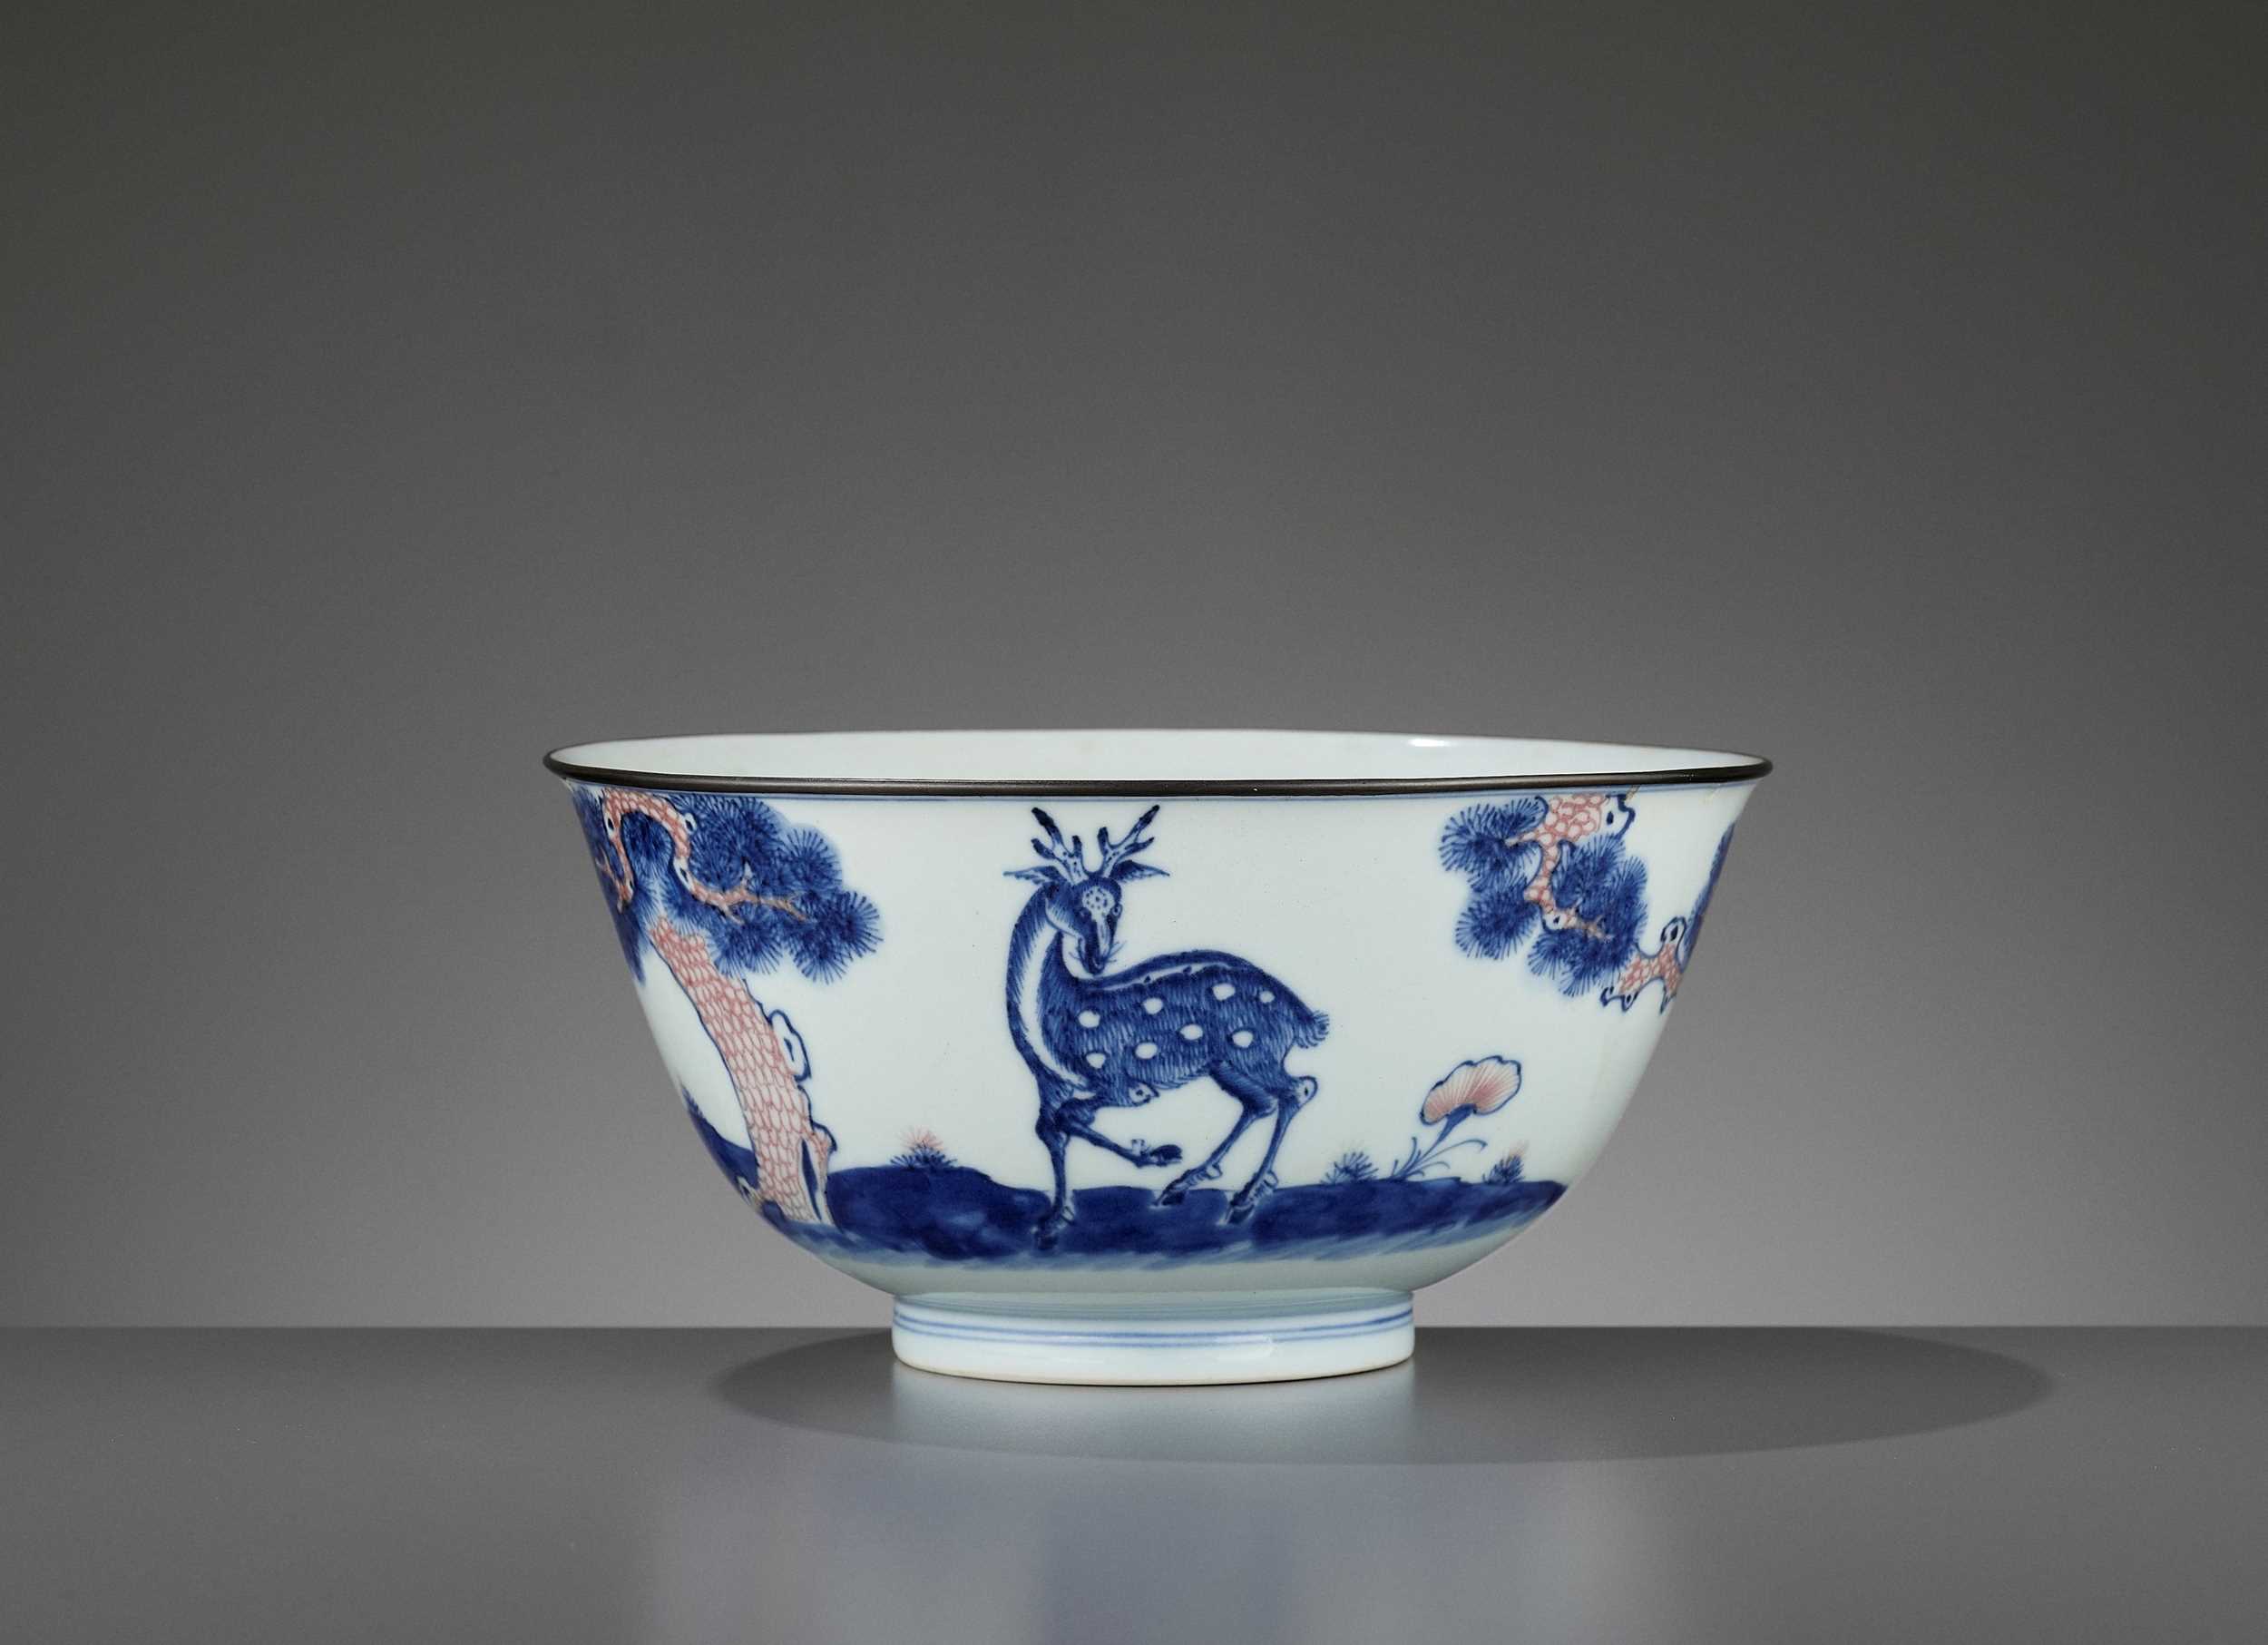 Lot 256 - A COPPER-RED-DECORATED BLUE AND WHITE ‘DEER’ BOWL, QIANLONG MARK AND PERIOD